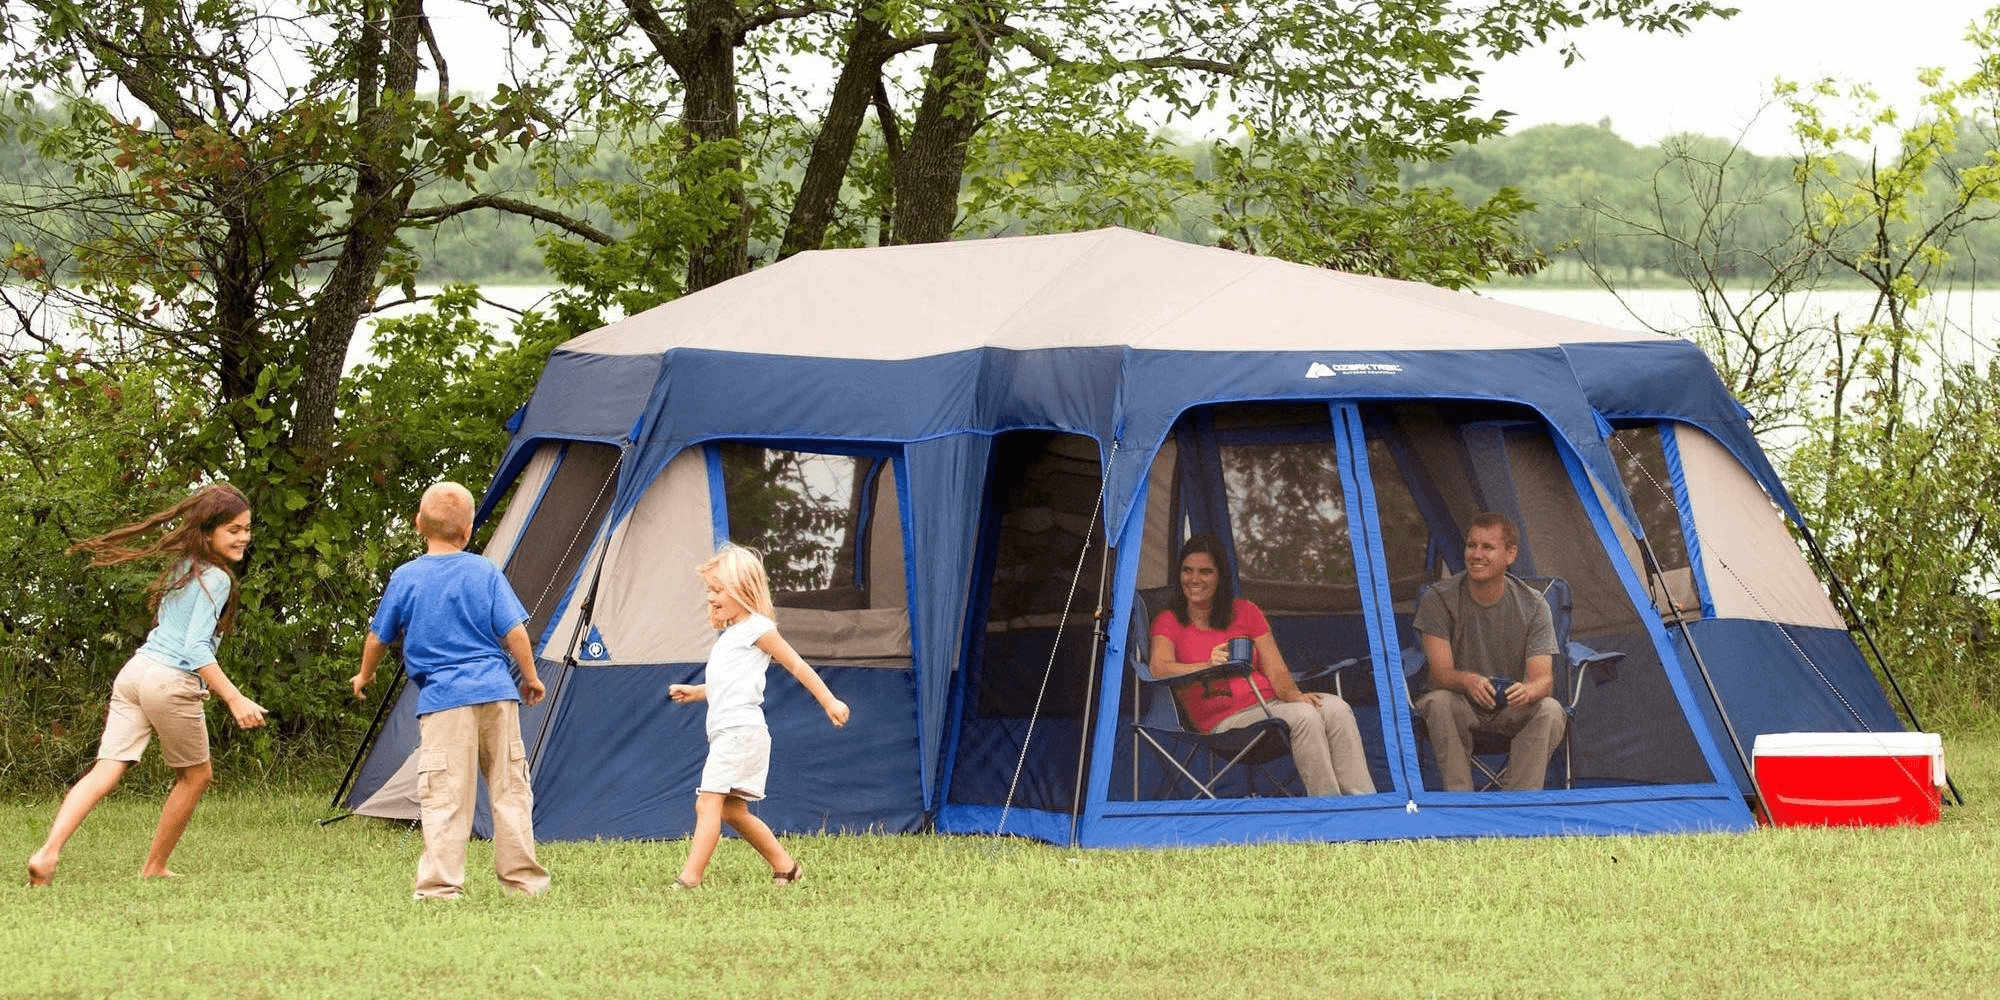 How tall should a tent be? Easy Guide 2022